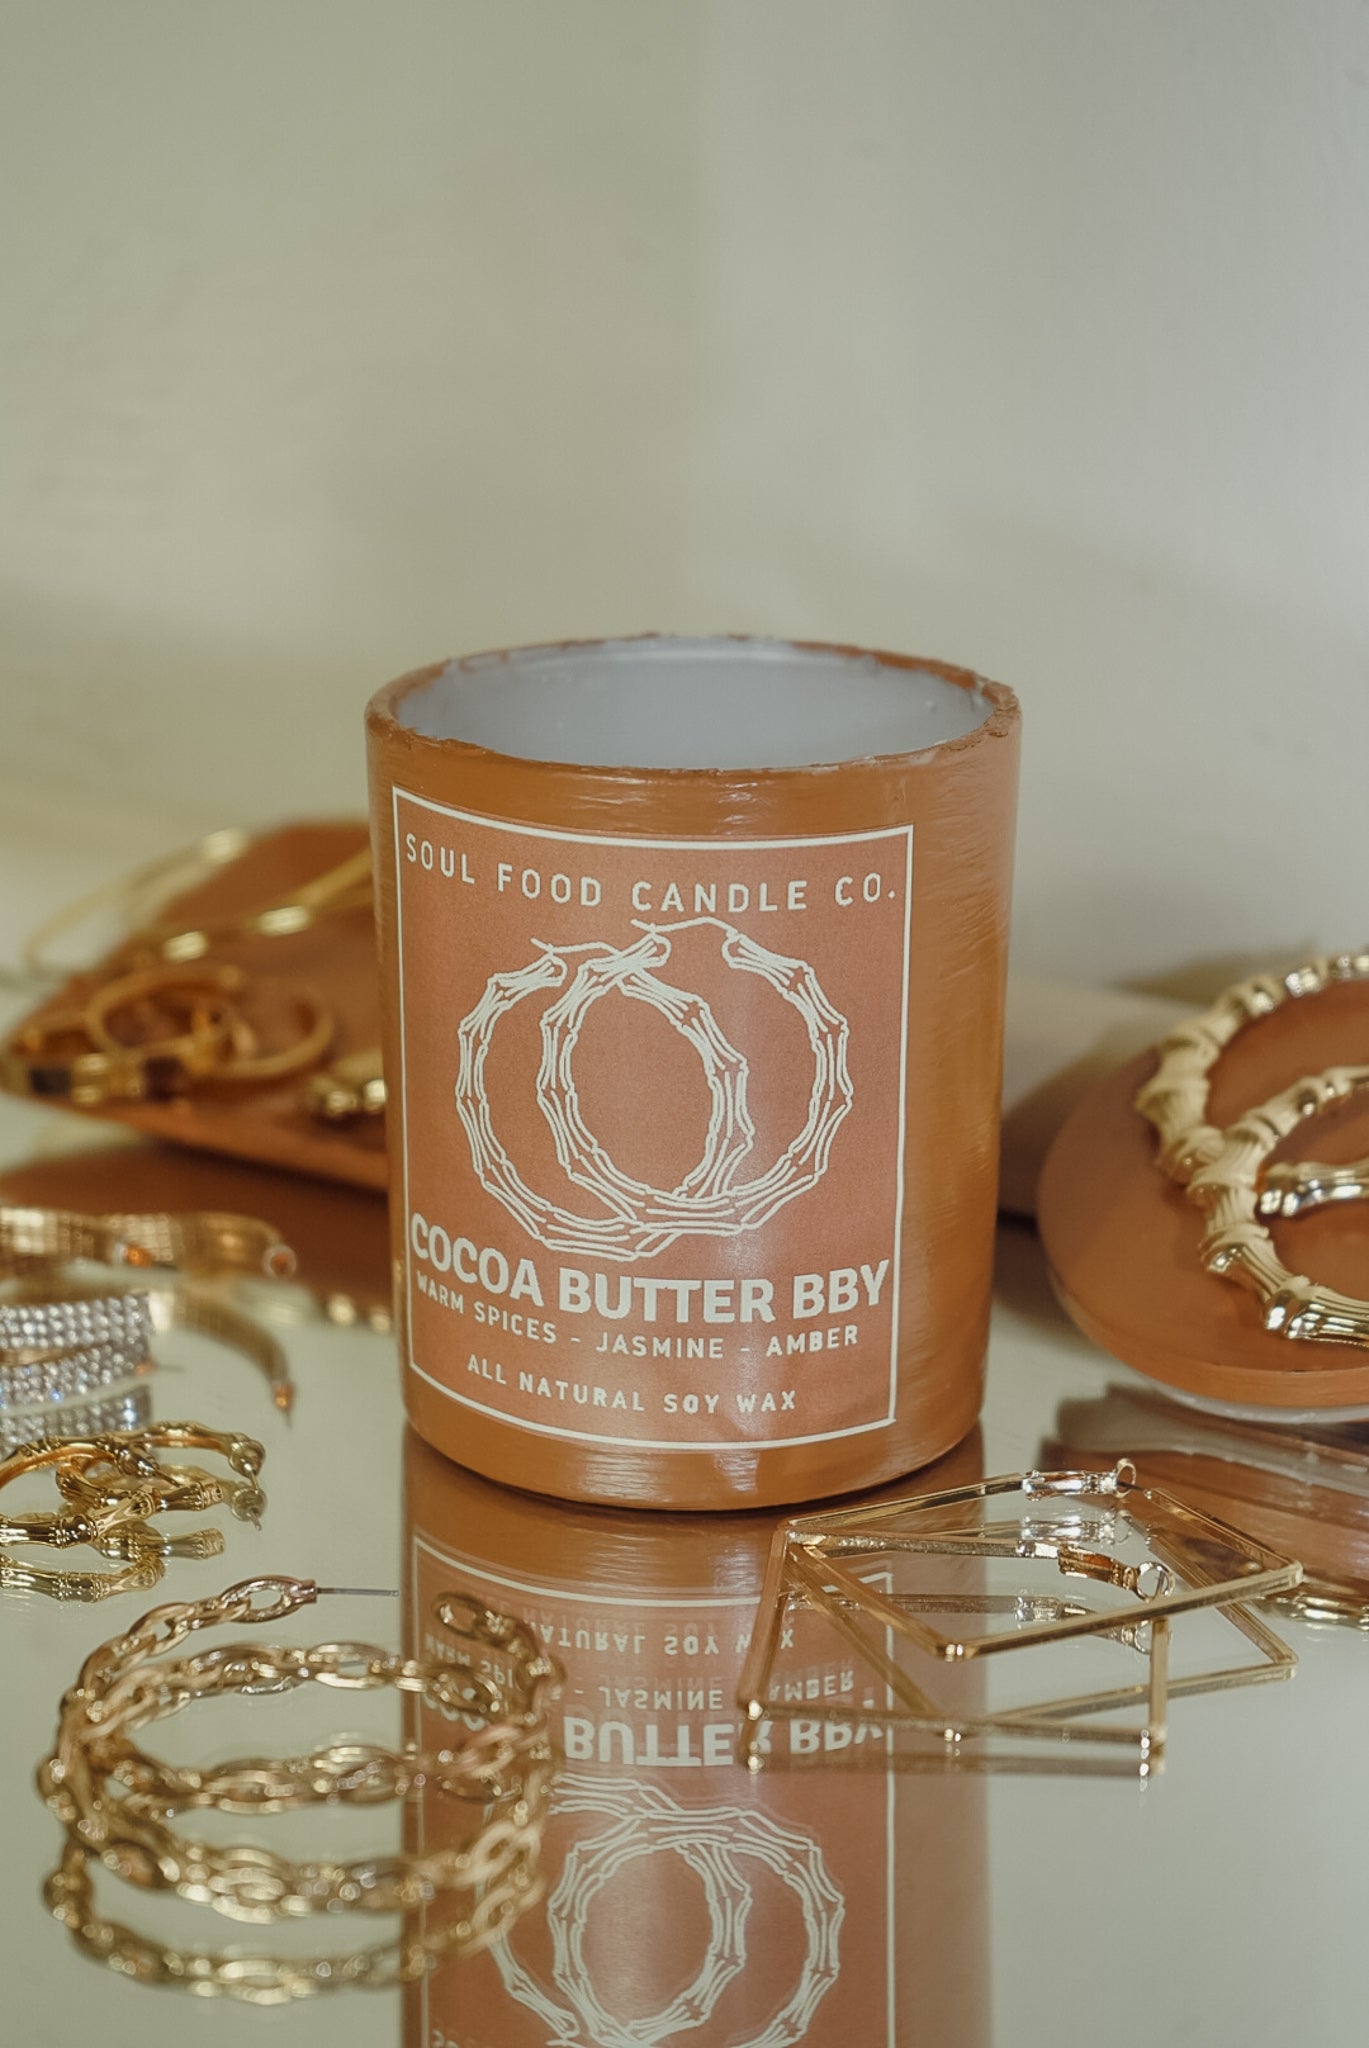 Cocoa Butter Bby - Soul Food Candle Company